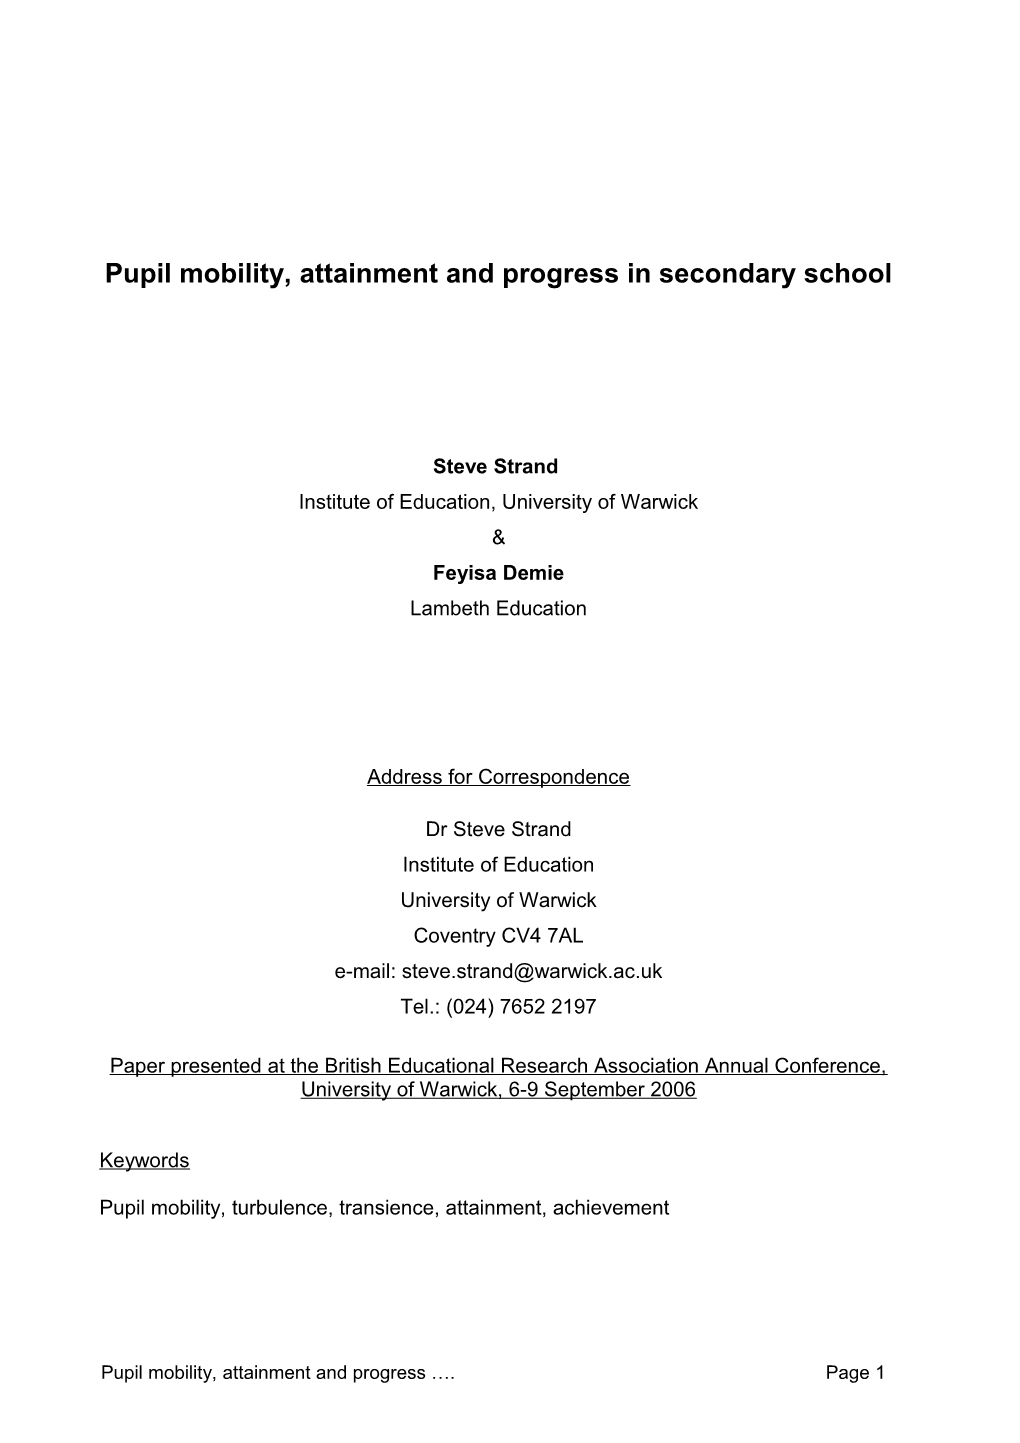 Pupil Mobility, Attainment and Progress in Secondary School